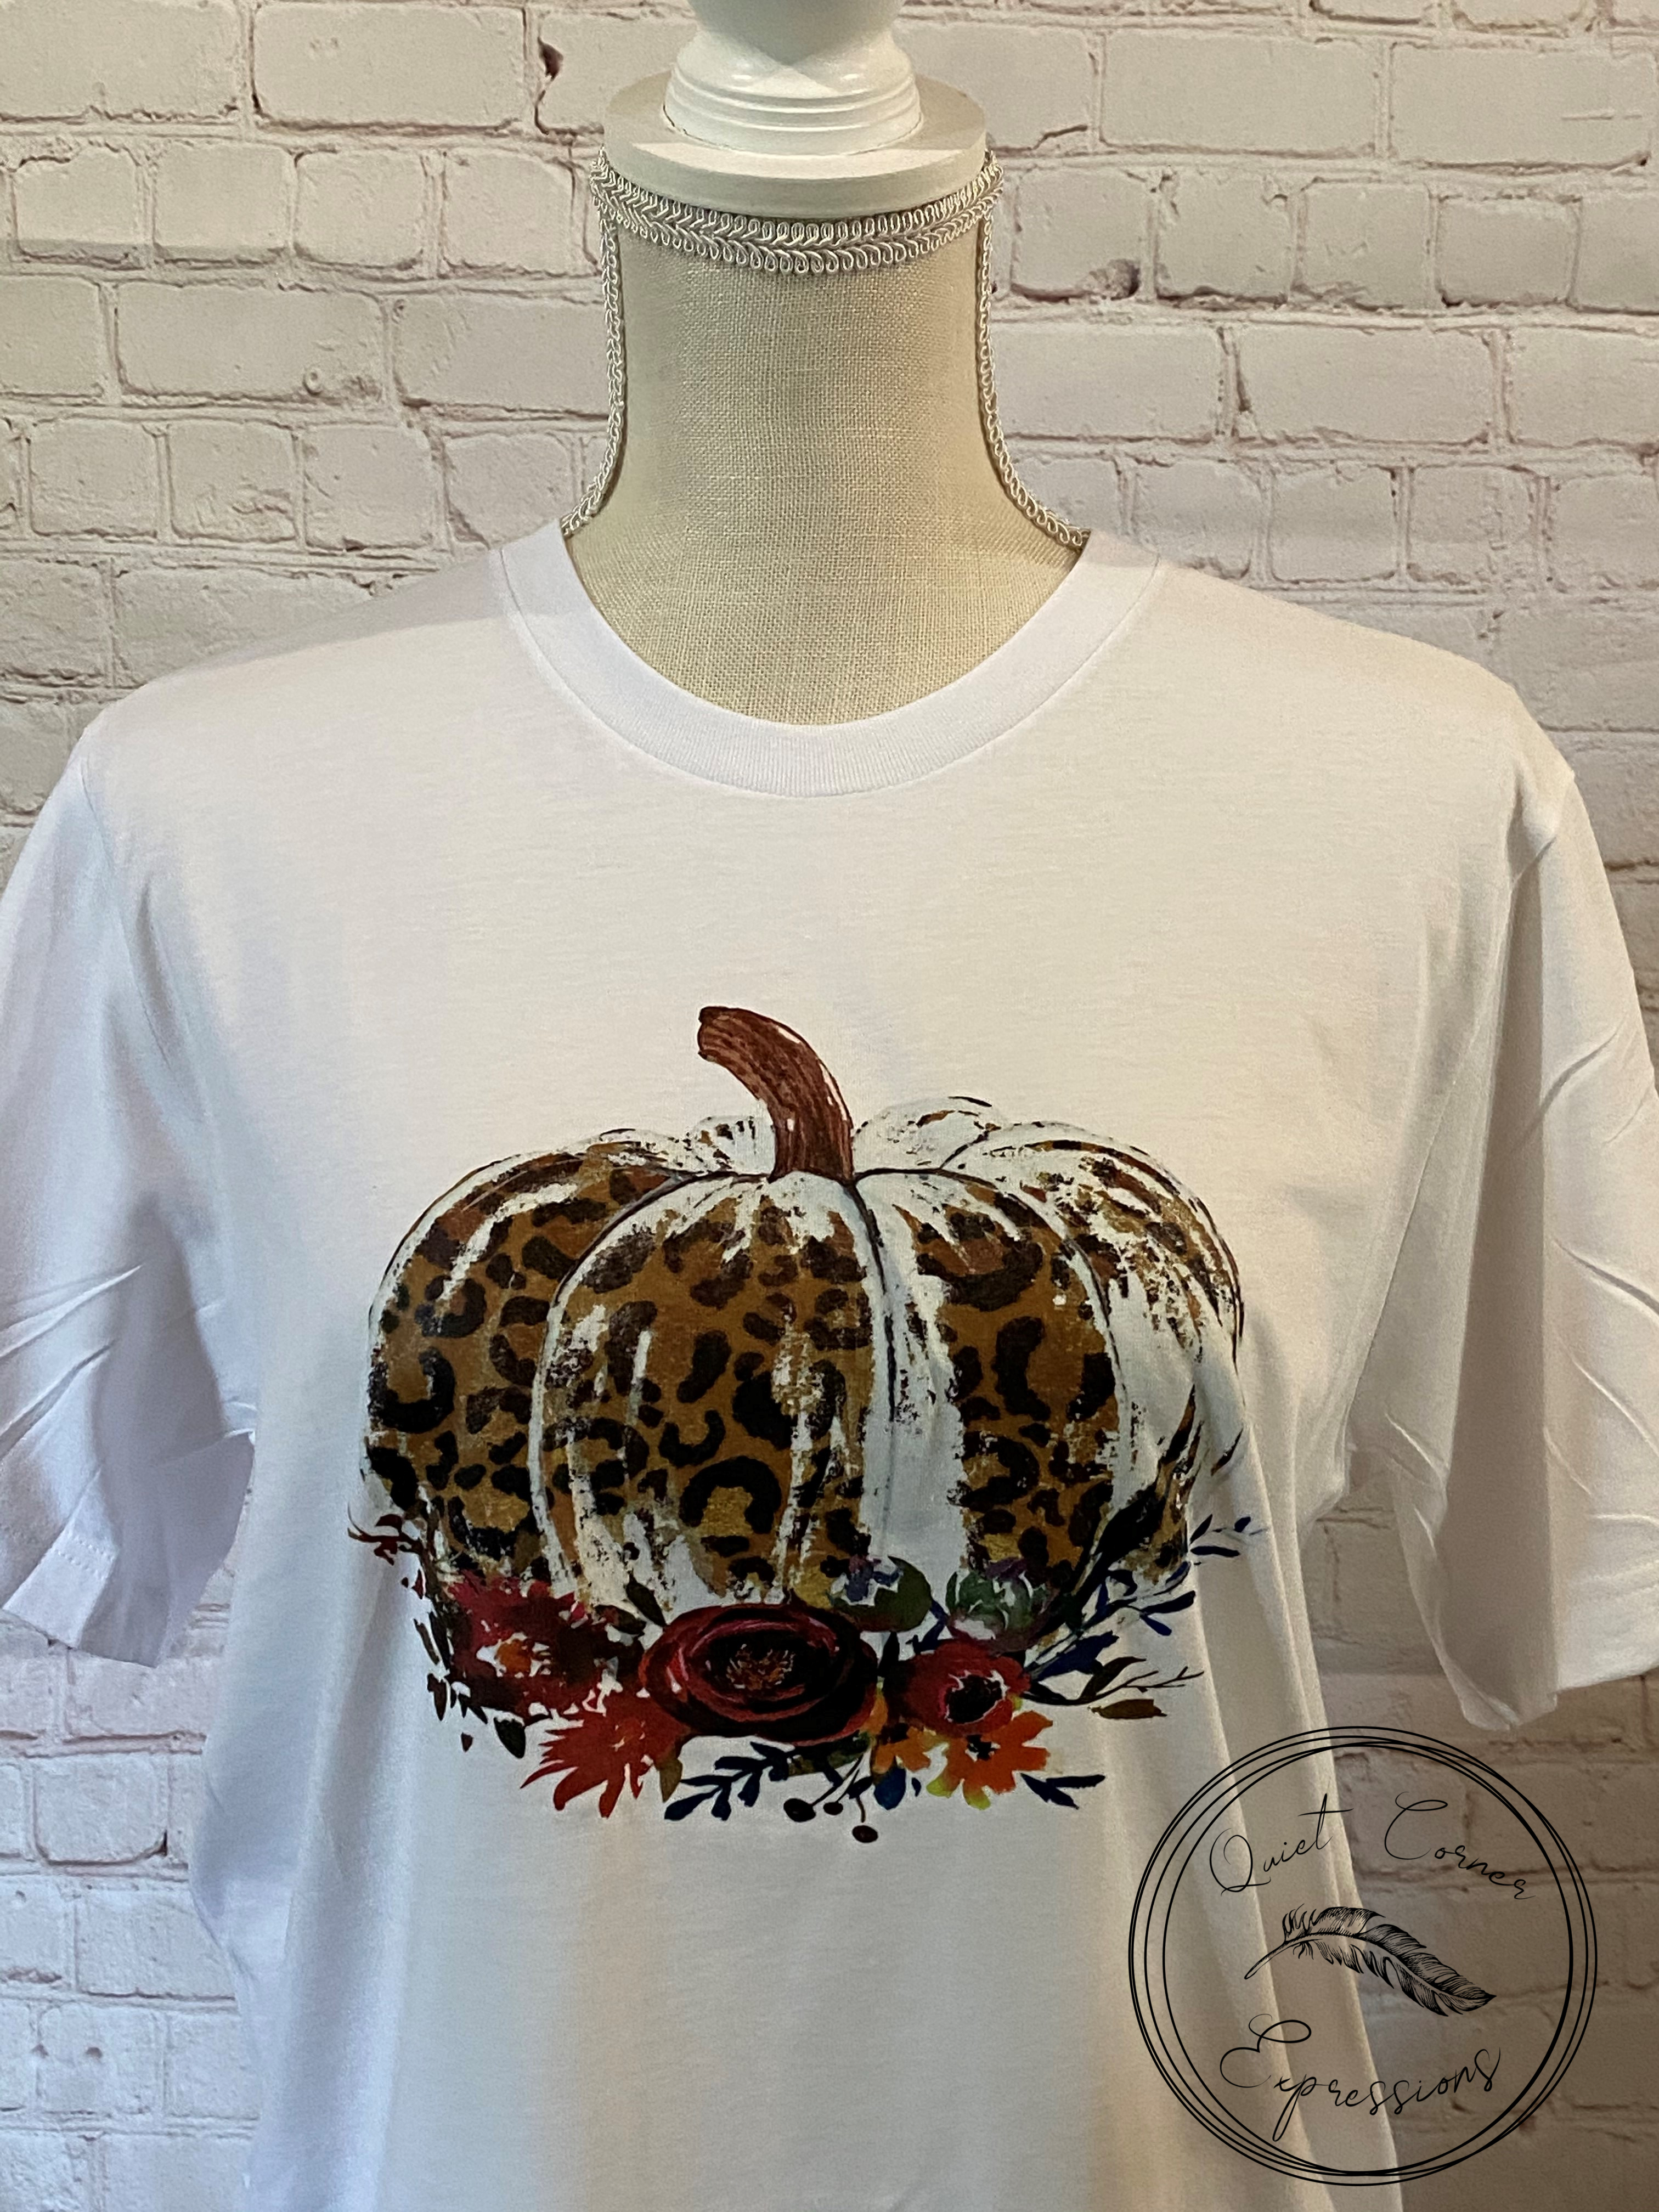 Distressed Leopard Pumpkin Tee made with sublimation printing